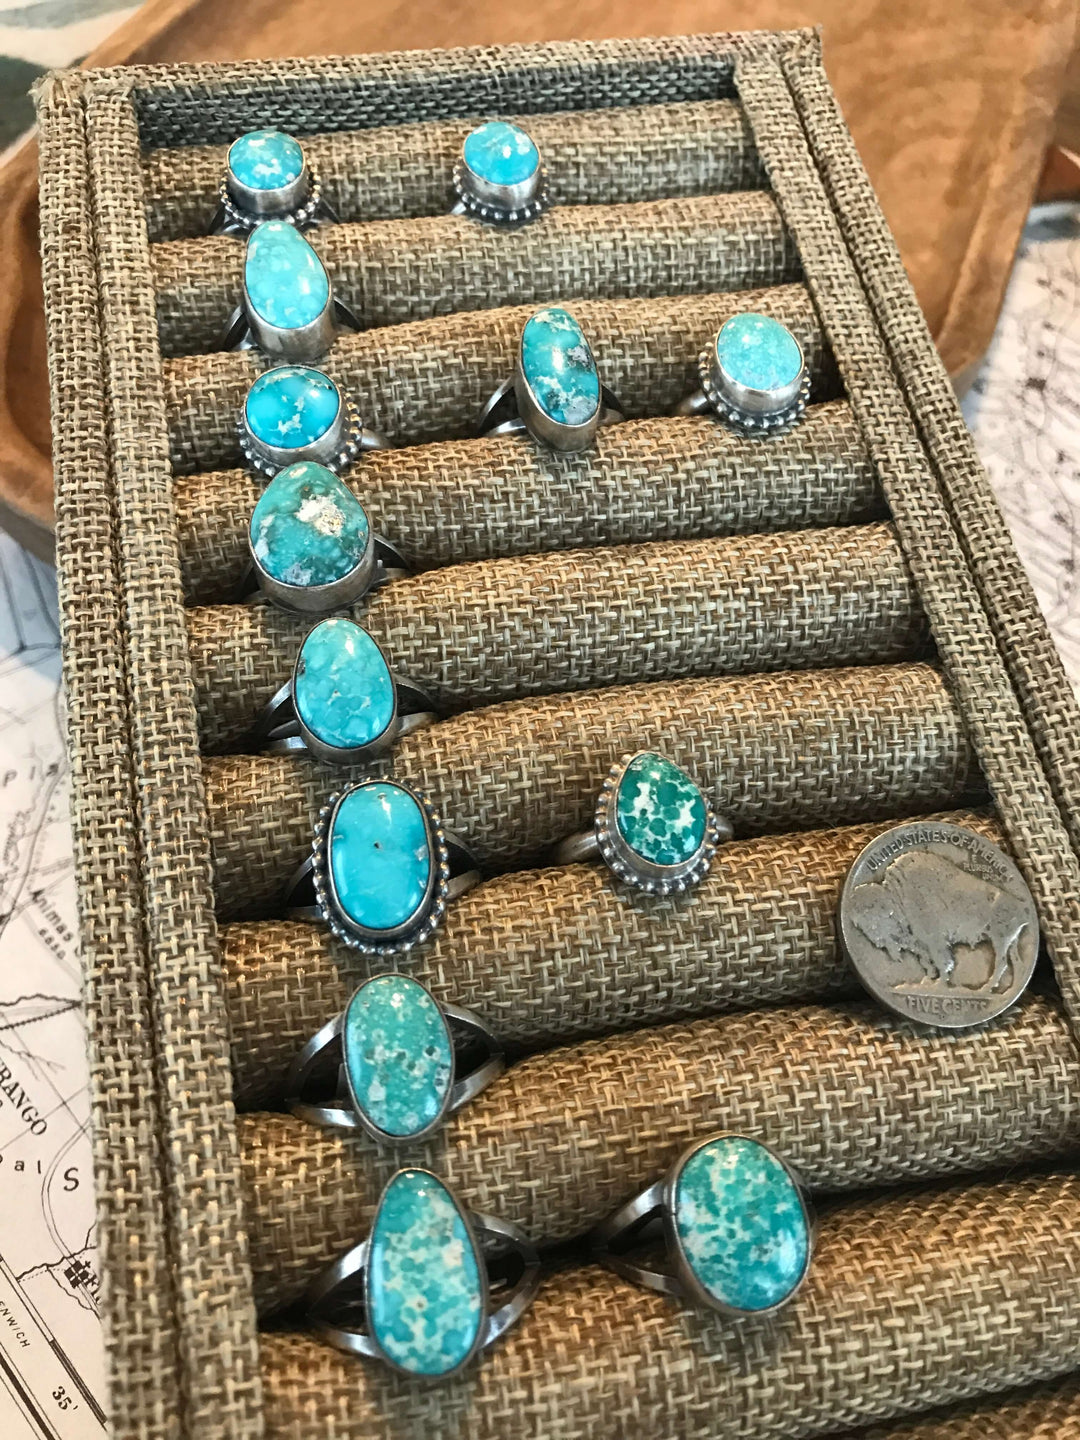 The Nabesna Turquoise Rings-Rings-Calli Co., Turquoise and Silver Jewelry, Native American Handmade, Zuni Tribe, Navajo Tribe, Brock Texas